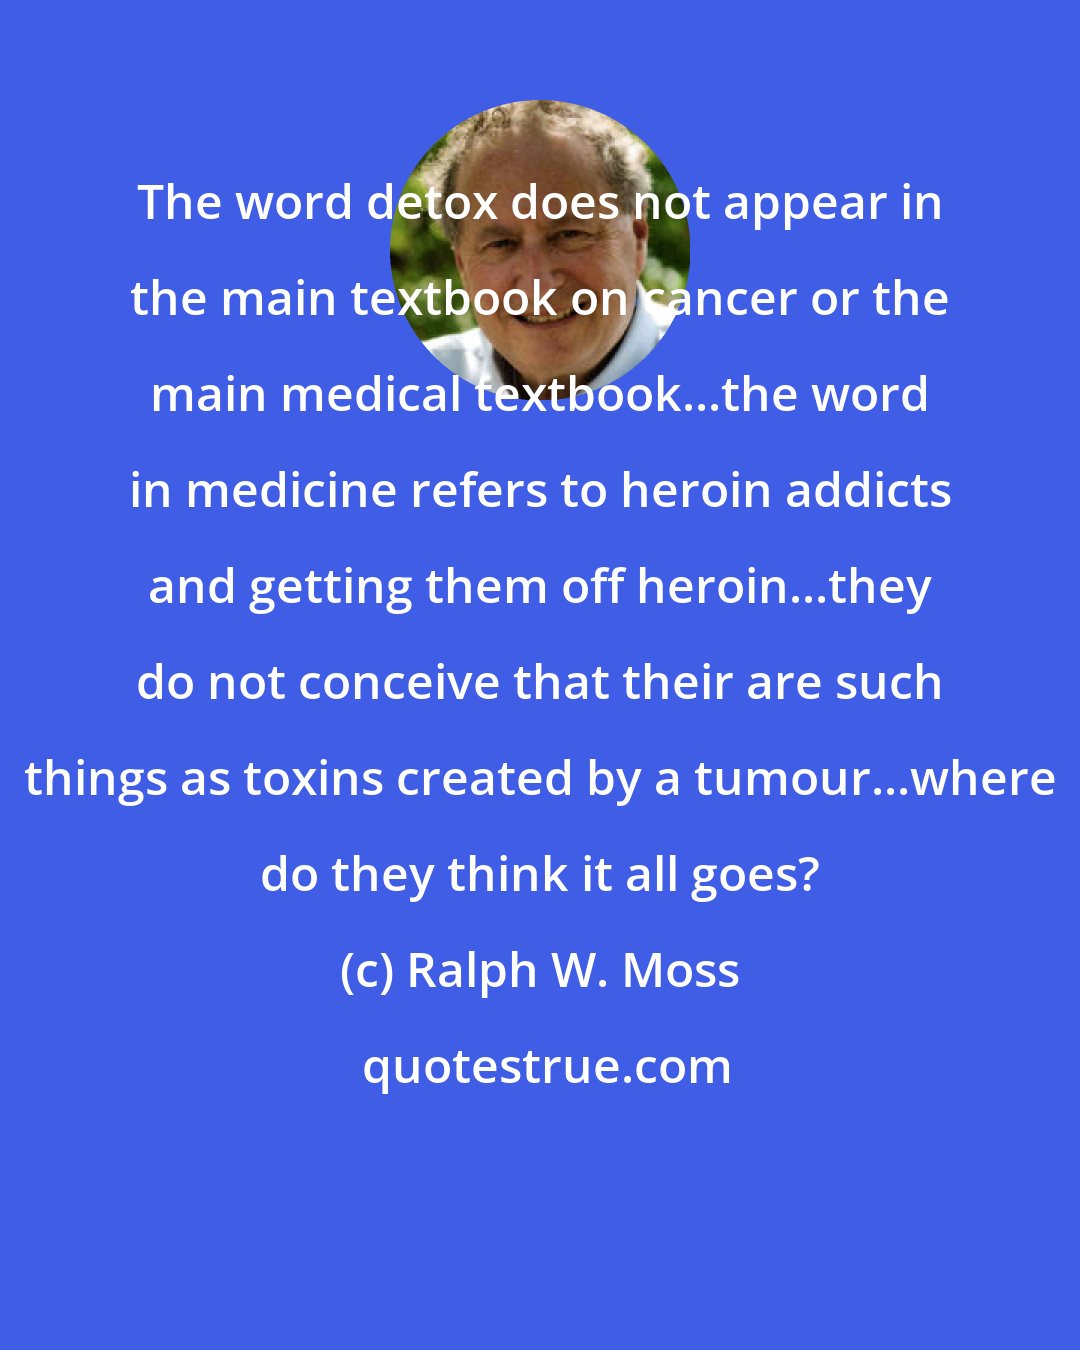 Ralph W. Moss: The word detox does not appear in the main textbook on cancer or the main medical textbook...the word in medicine refers to heroin addicts and getting them off heroin...they do not conceive that their are such things as toxins created by a tumour...where do they think it all goes?